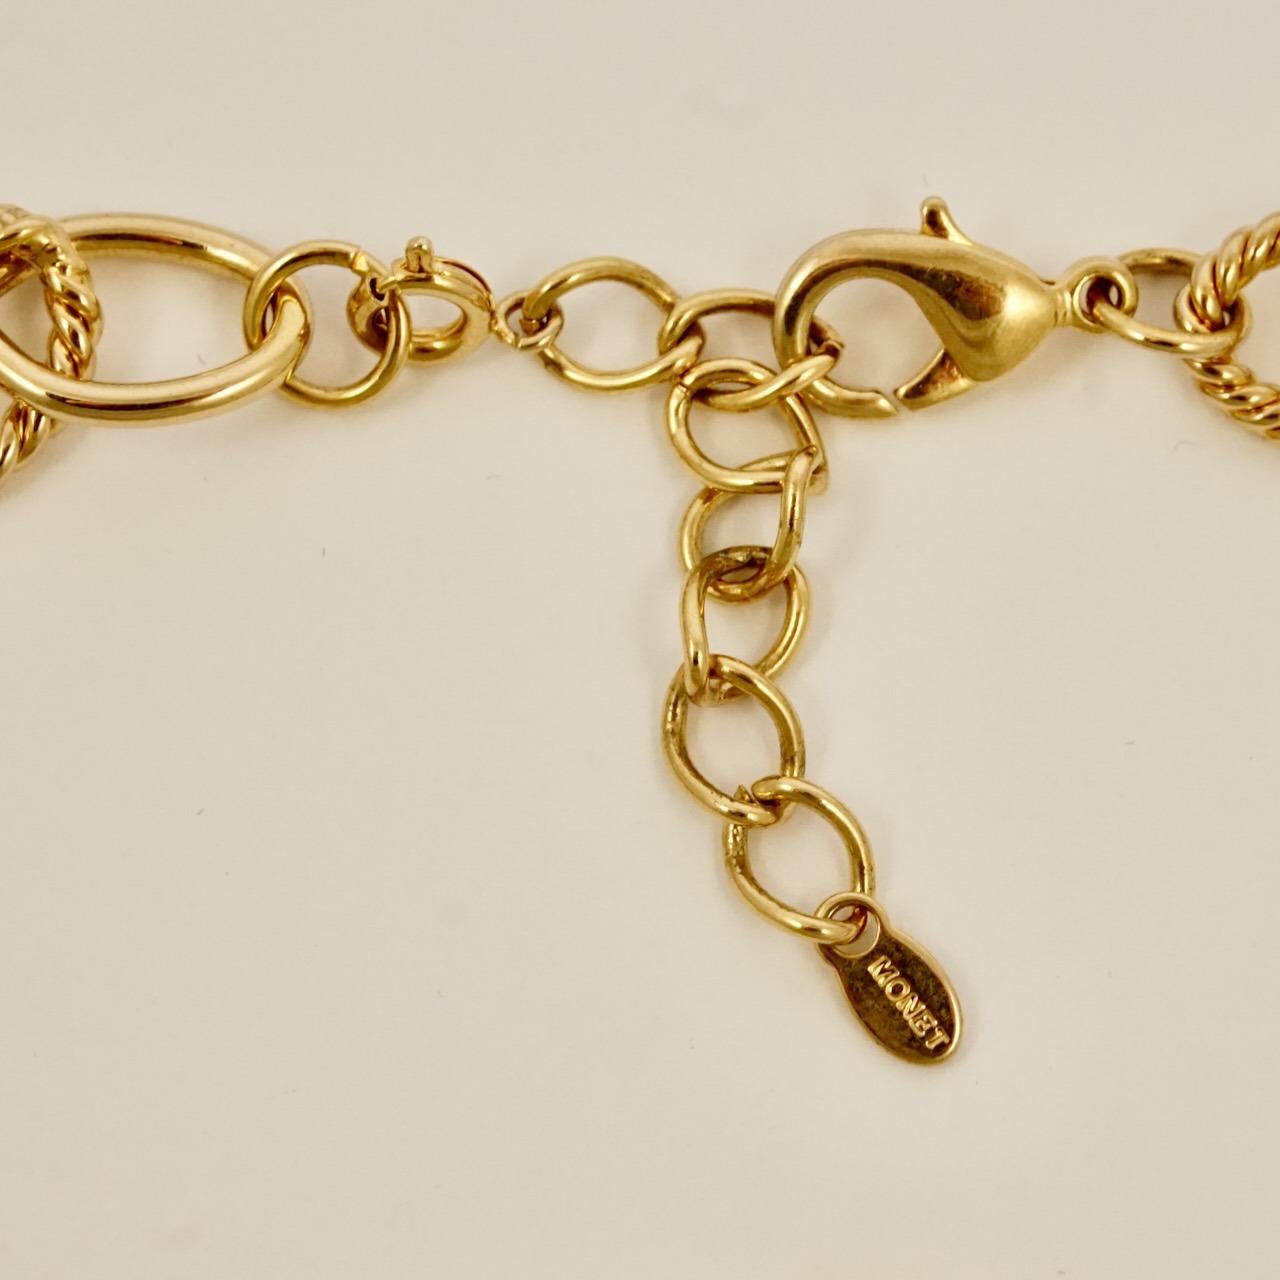 Monet Gold Plated Oval Link Chain Necklace circa 1980s  2